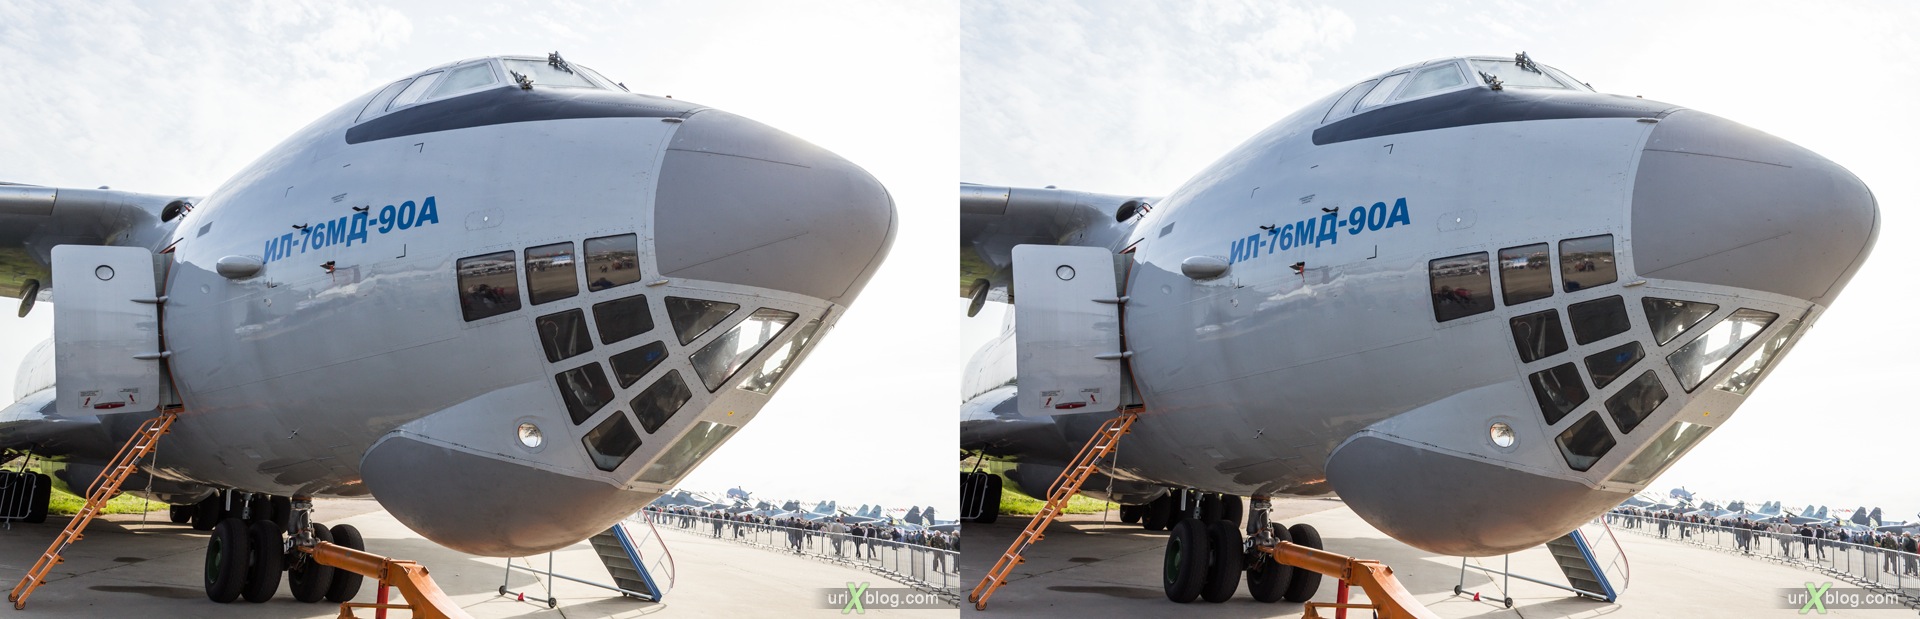 2013, Il-76MD-90A, MAKS, International Aviation and Space Salon, Russia, Ramenskoye airfield, airplane, 3D, stereo pair, cross-eyed, crossview, cross view stereo pair, stereoscopic